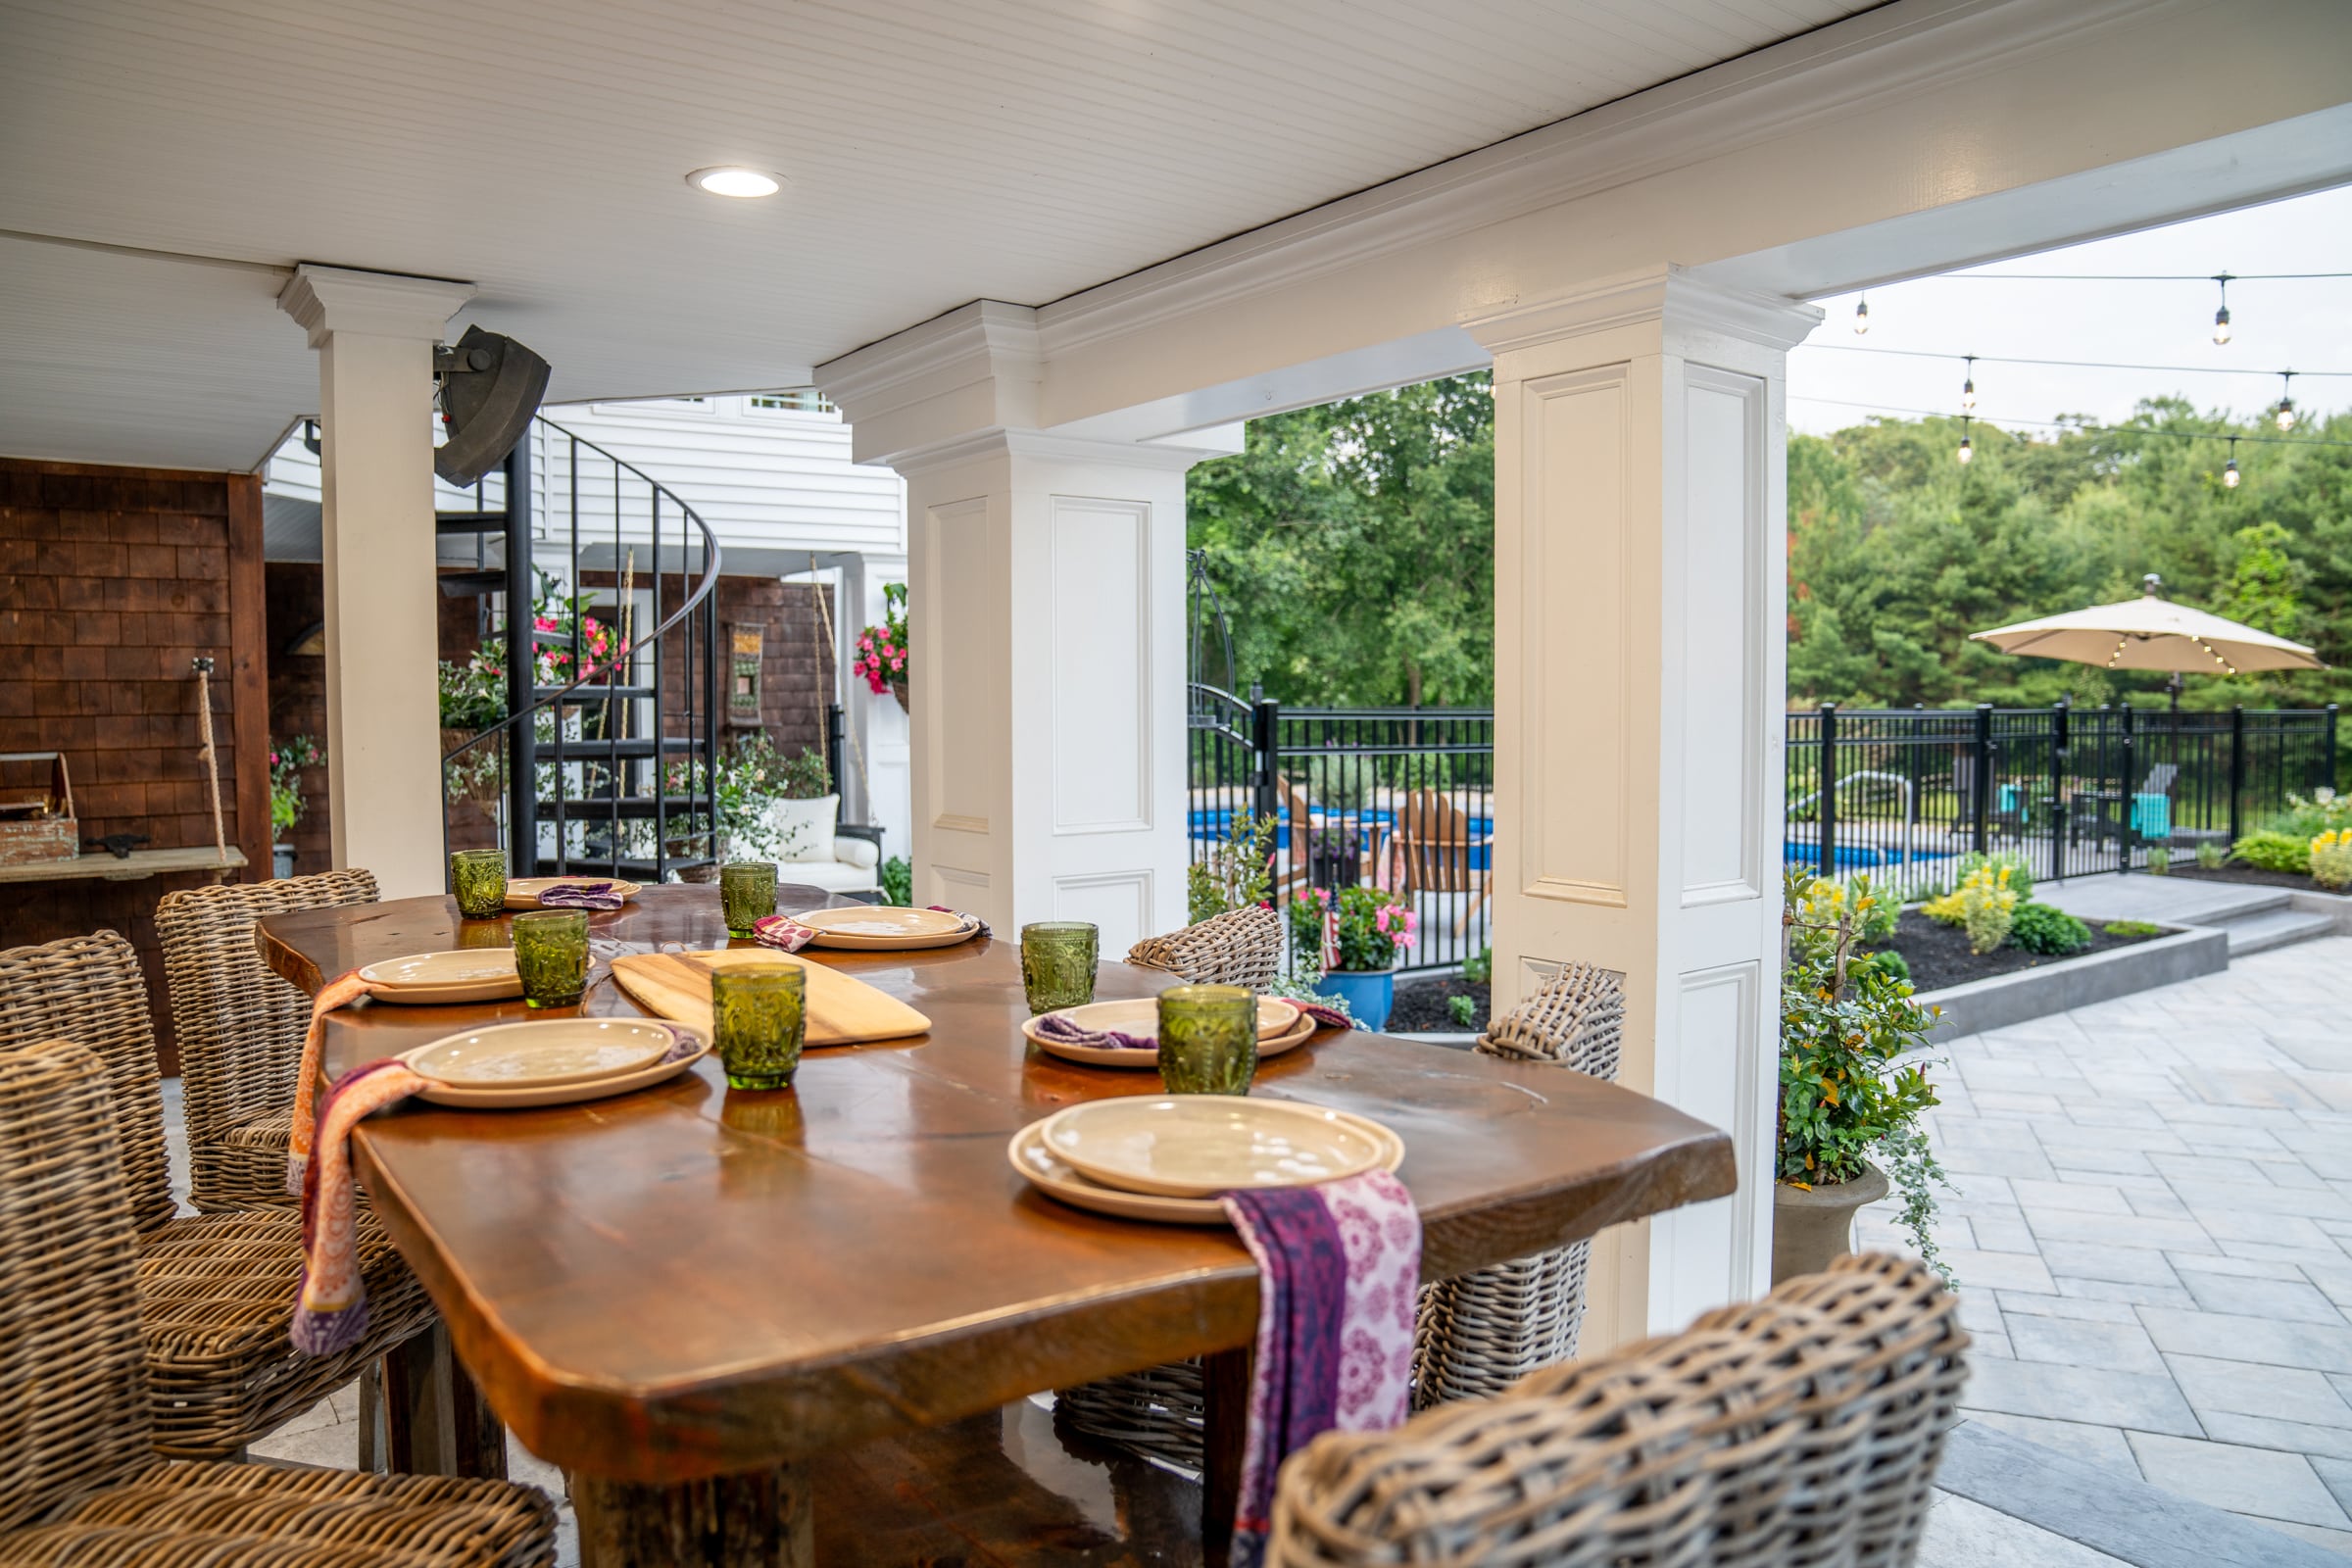 The covered outdoor dining patio was built using natural travertine stone pavers, and is an elegant place to host a dinner party throughout the warm New England months.